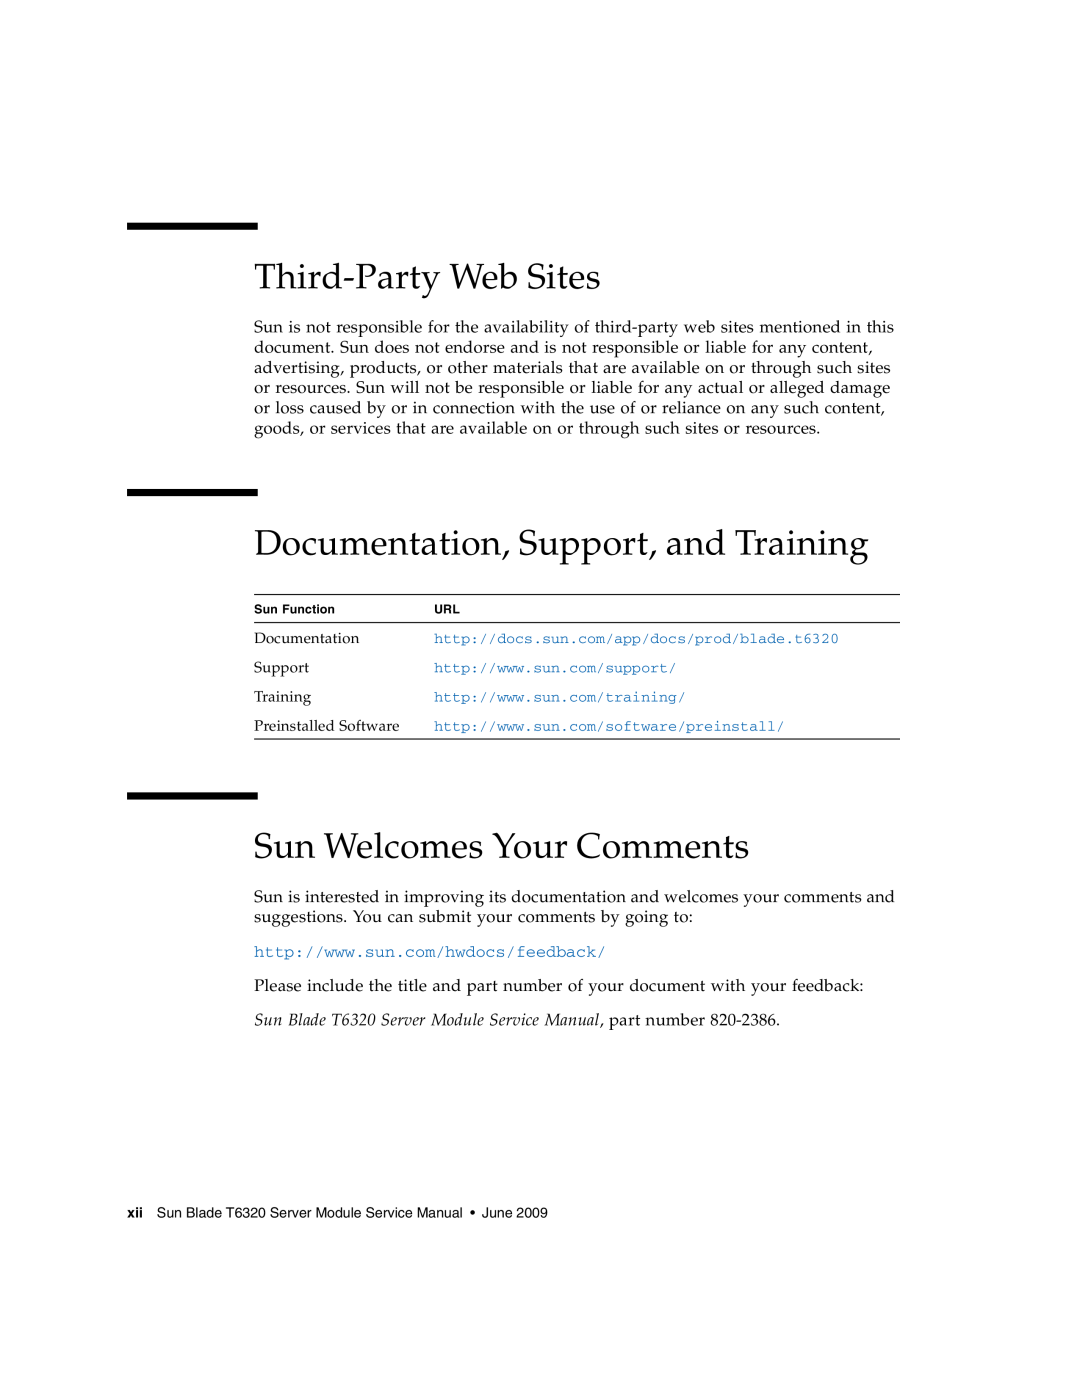 Sun Microsystems T6320 Third-Party Web Sites, Documentation, Support, and Training, Sun Welcomes Your Comments 